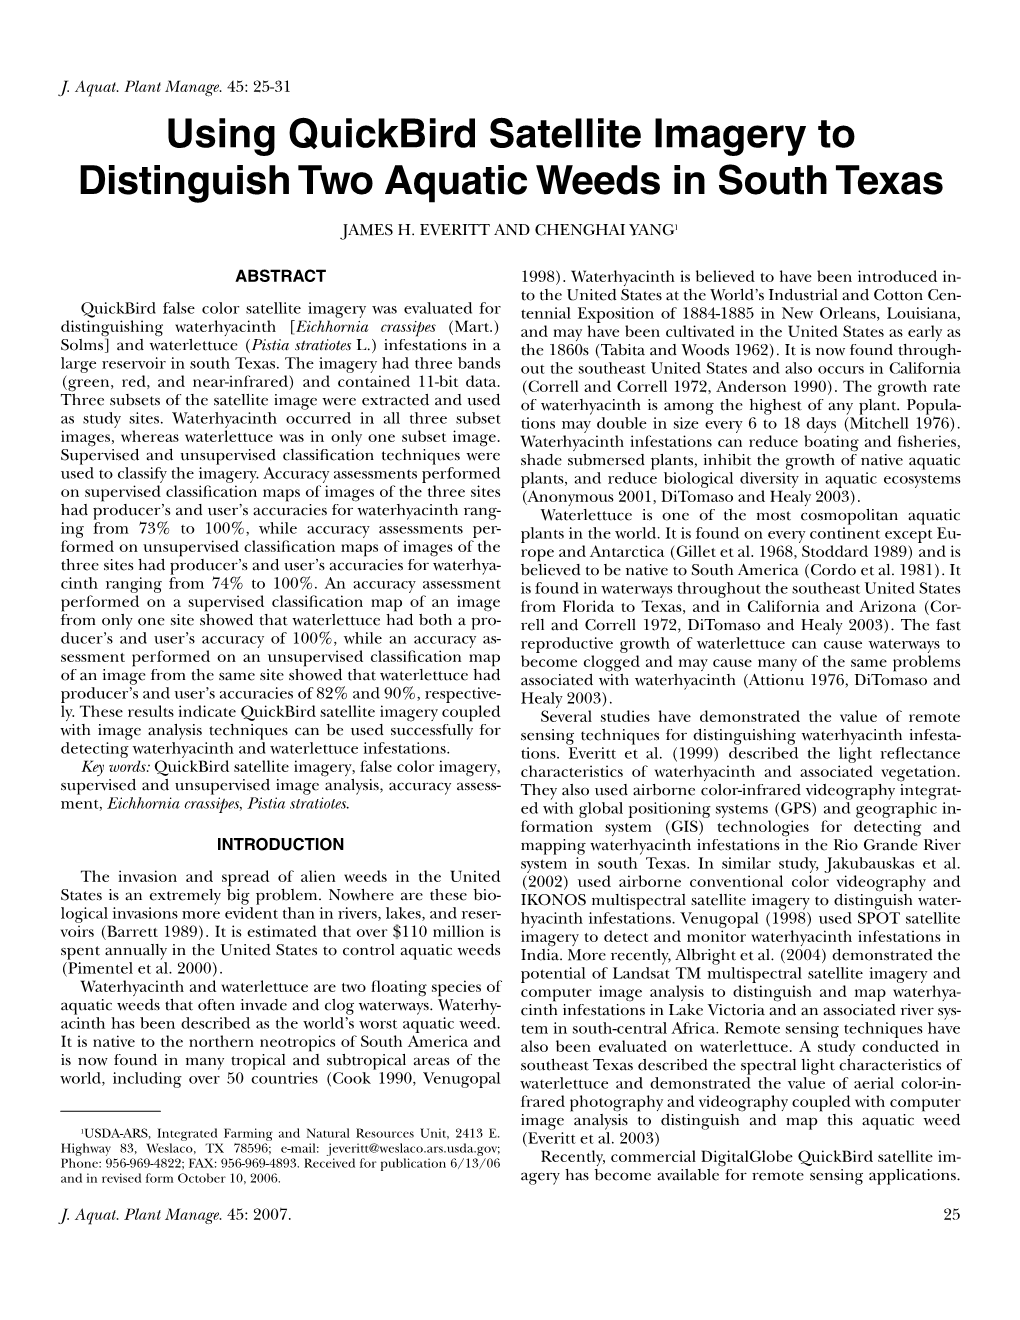 Using Quickbird Satellite Imagery to Distinguish Two Aquatic Weeds in South Texas